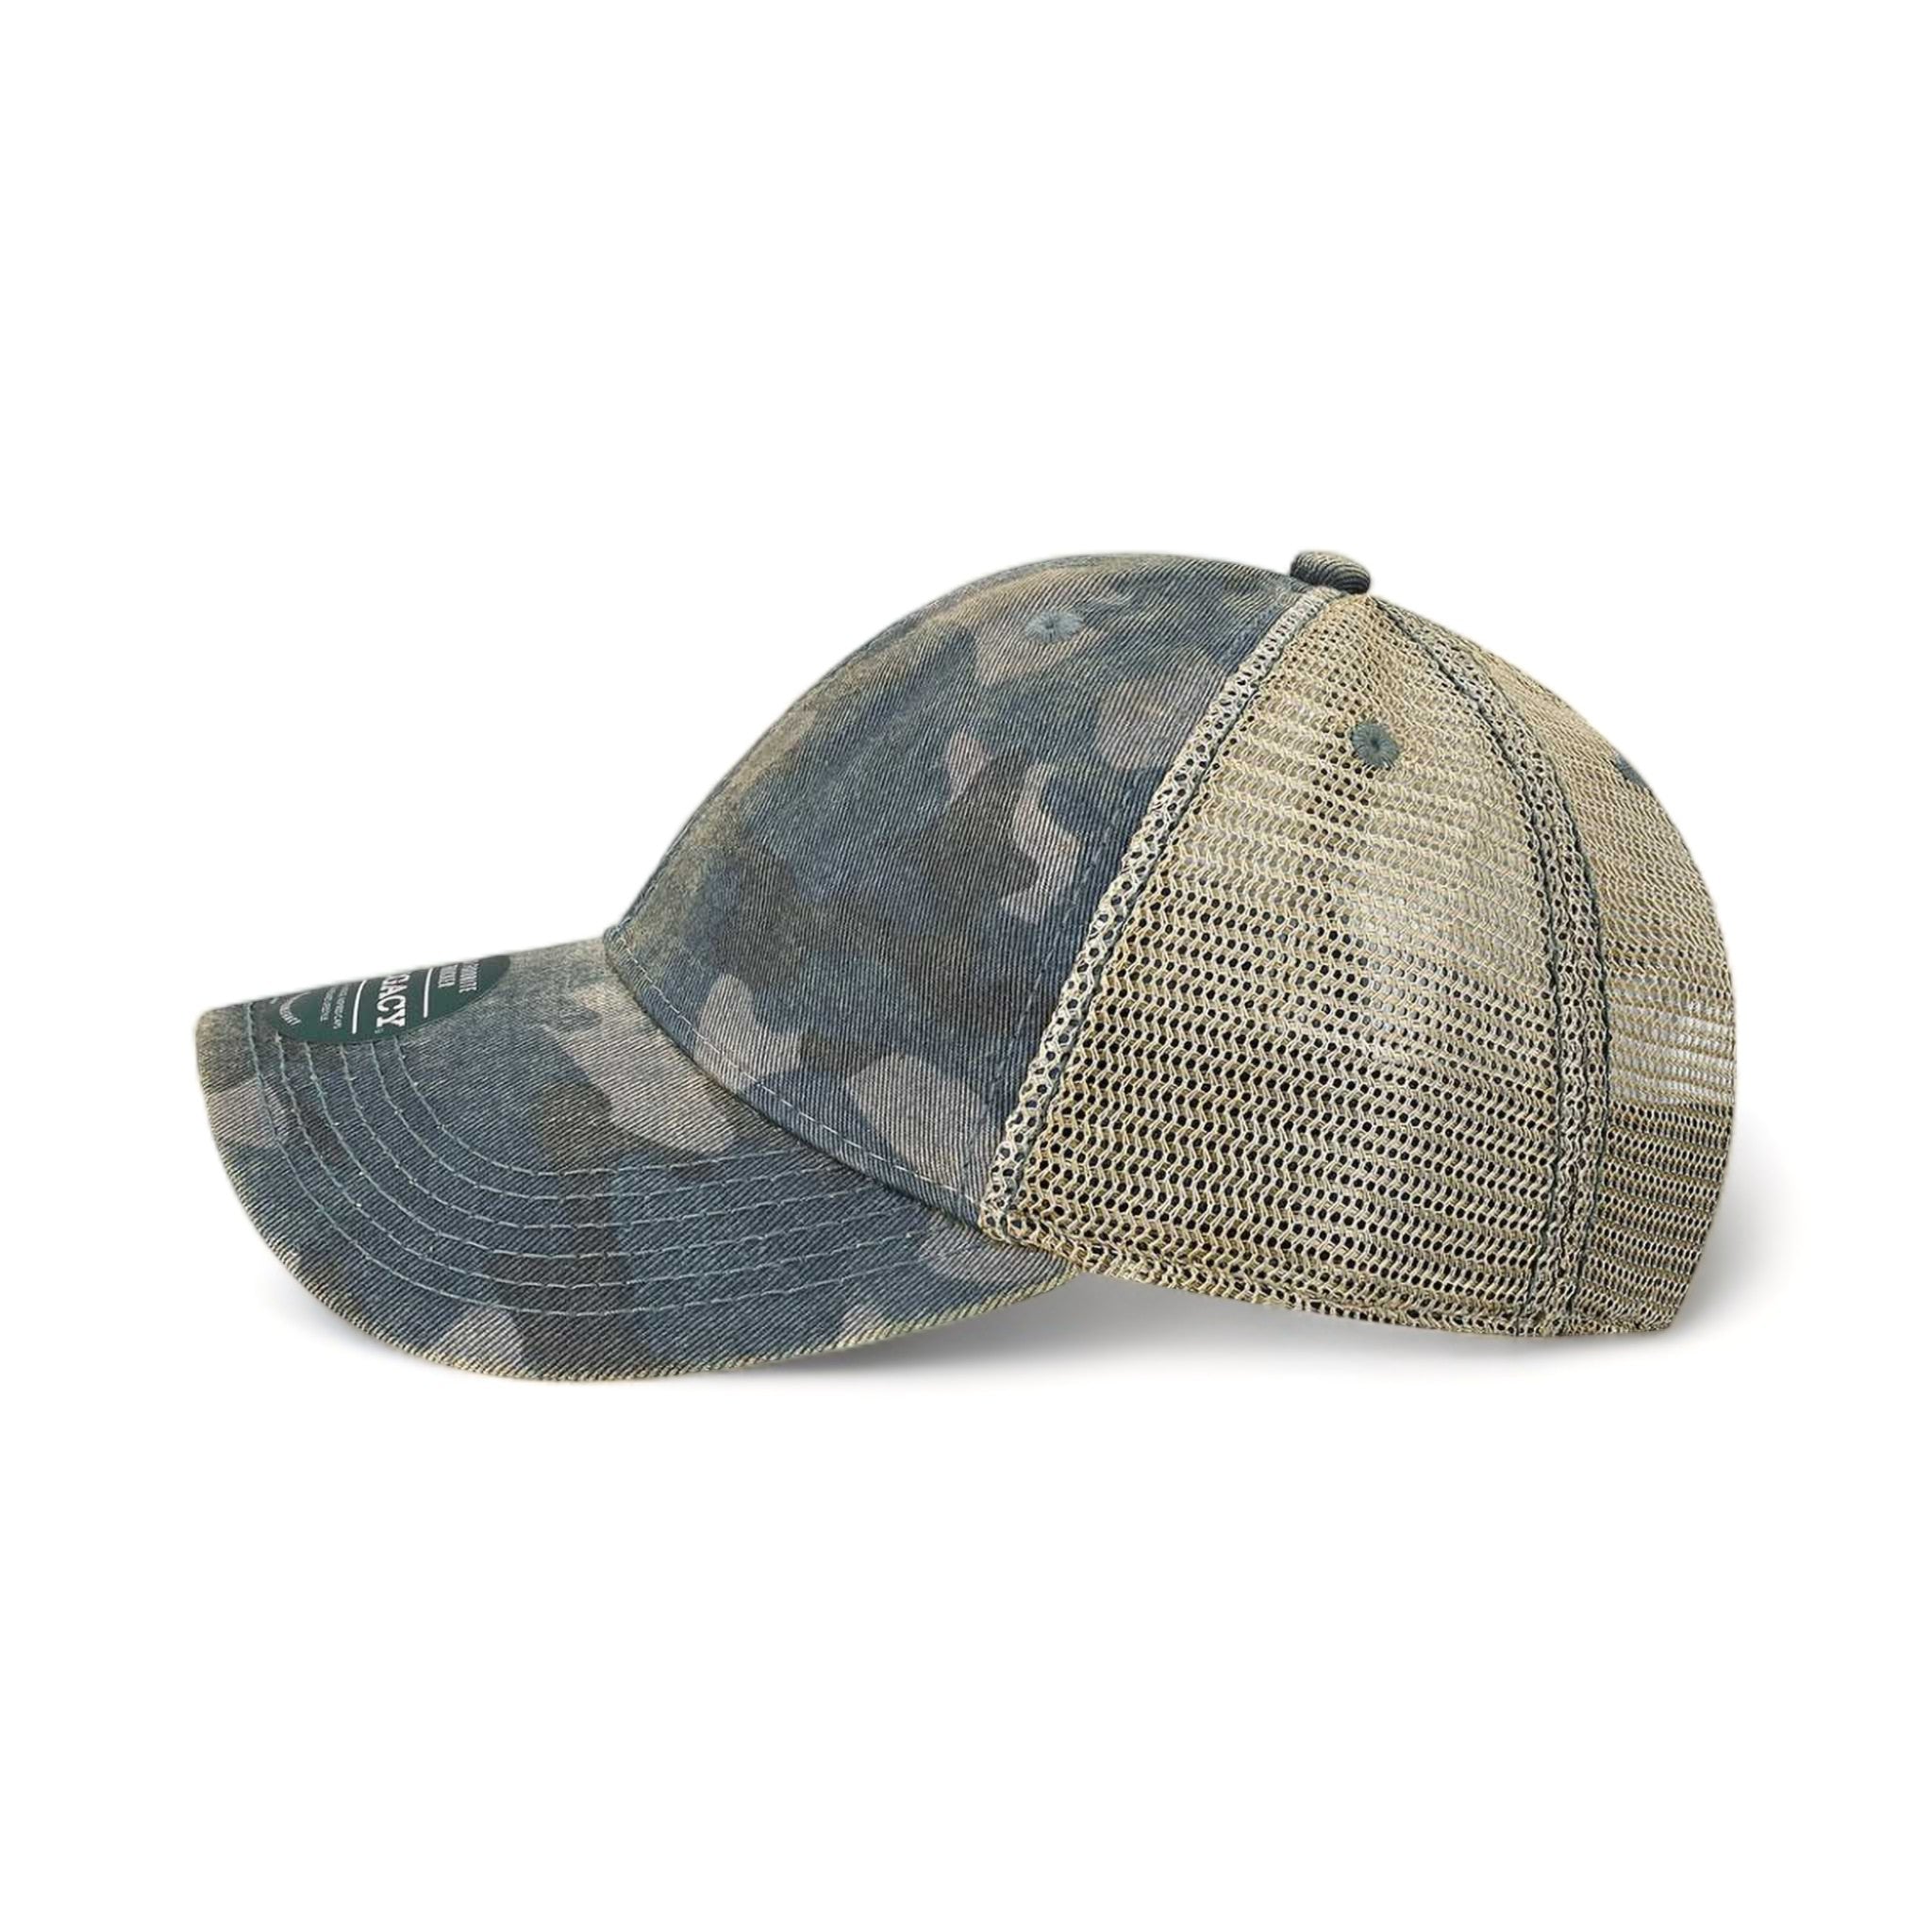 Side view of LEGACY OFA custom hat in blue camo and java